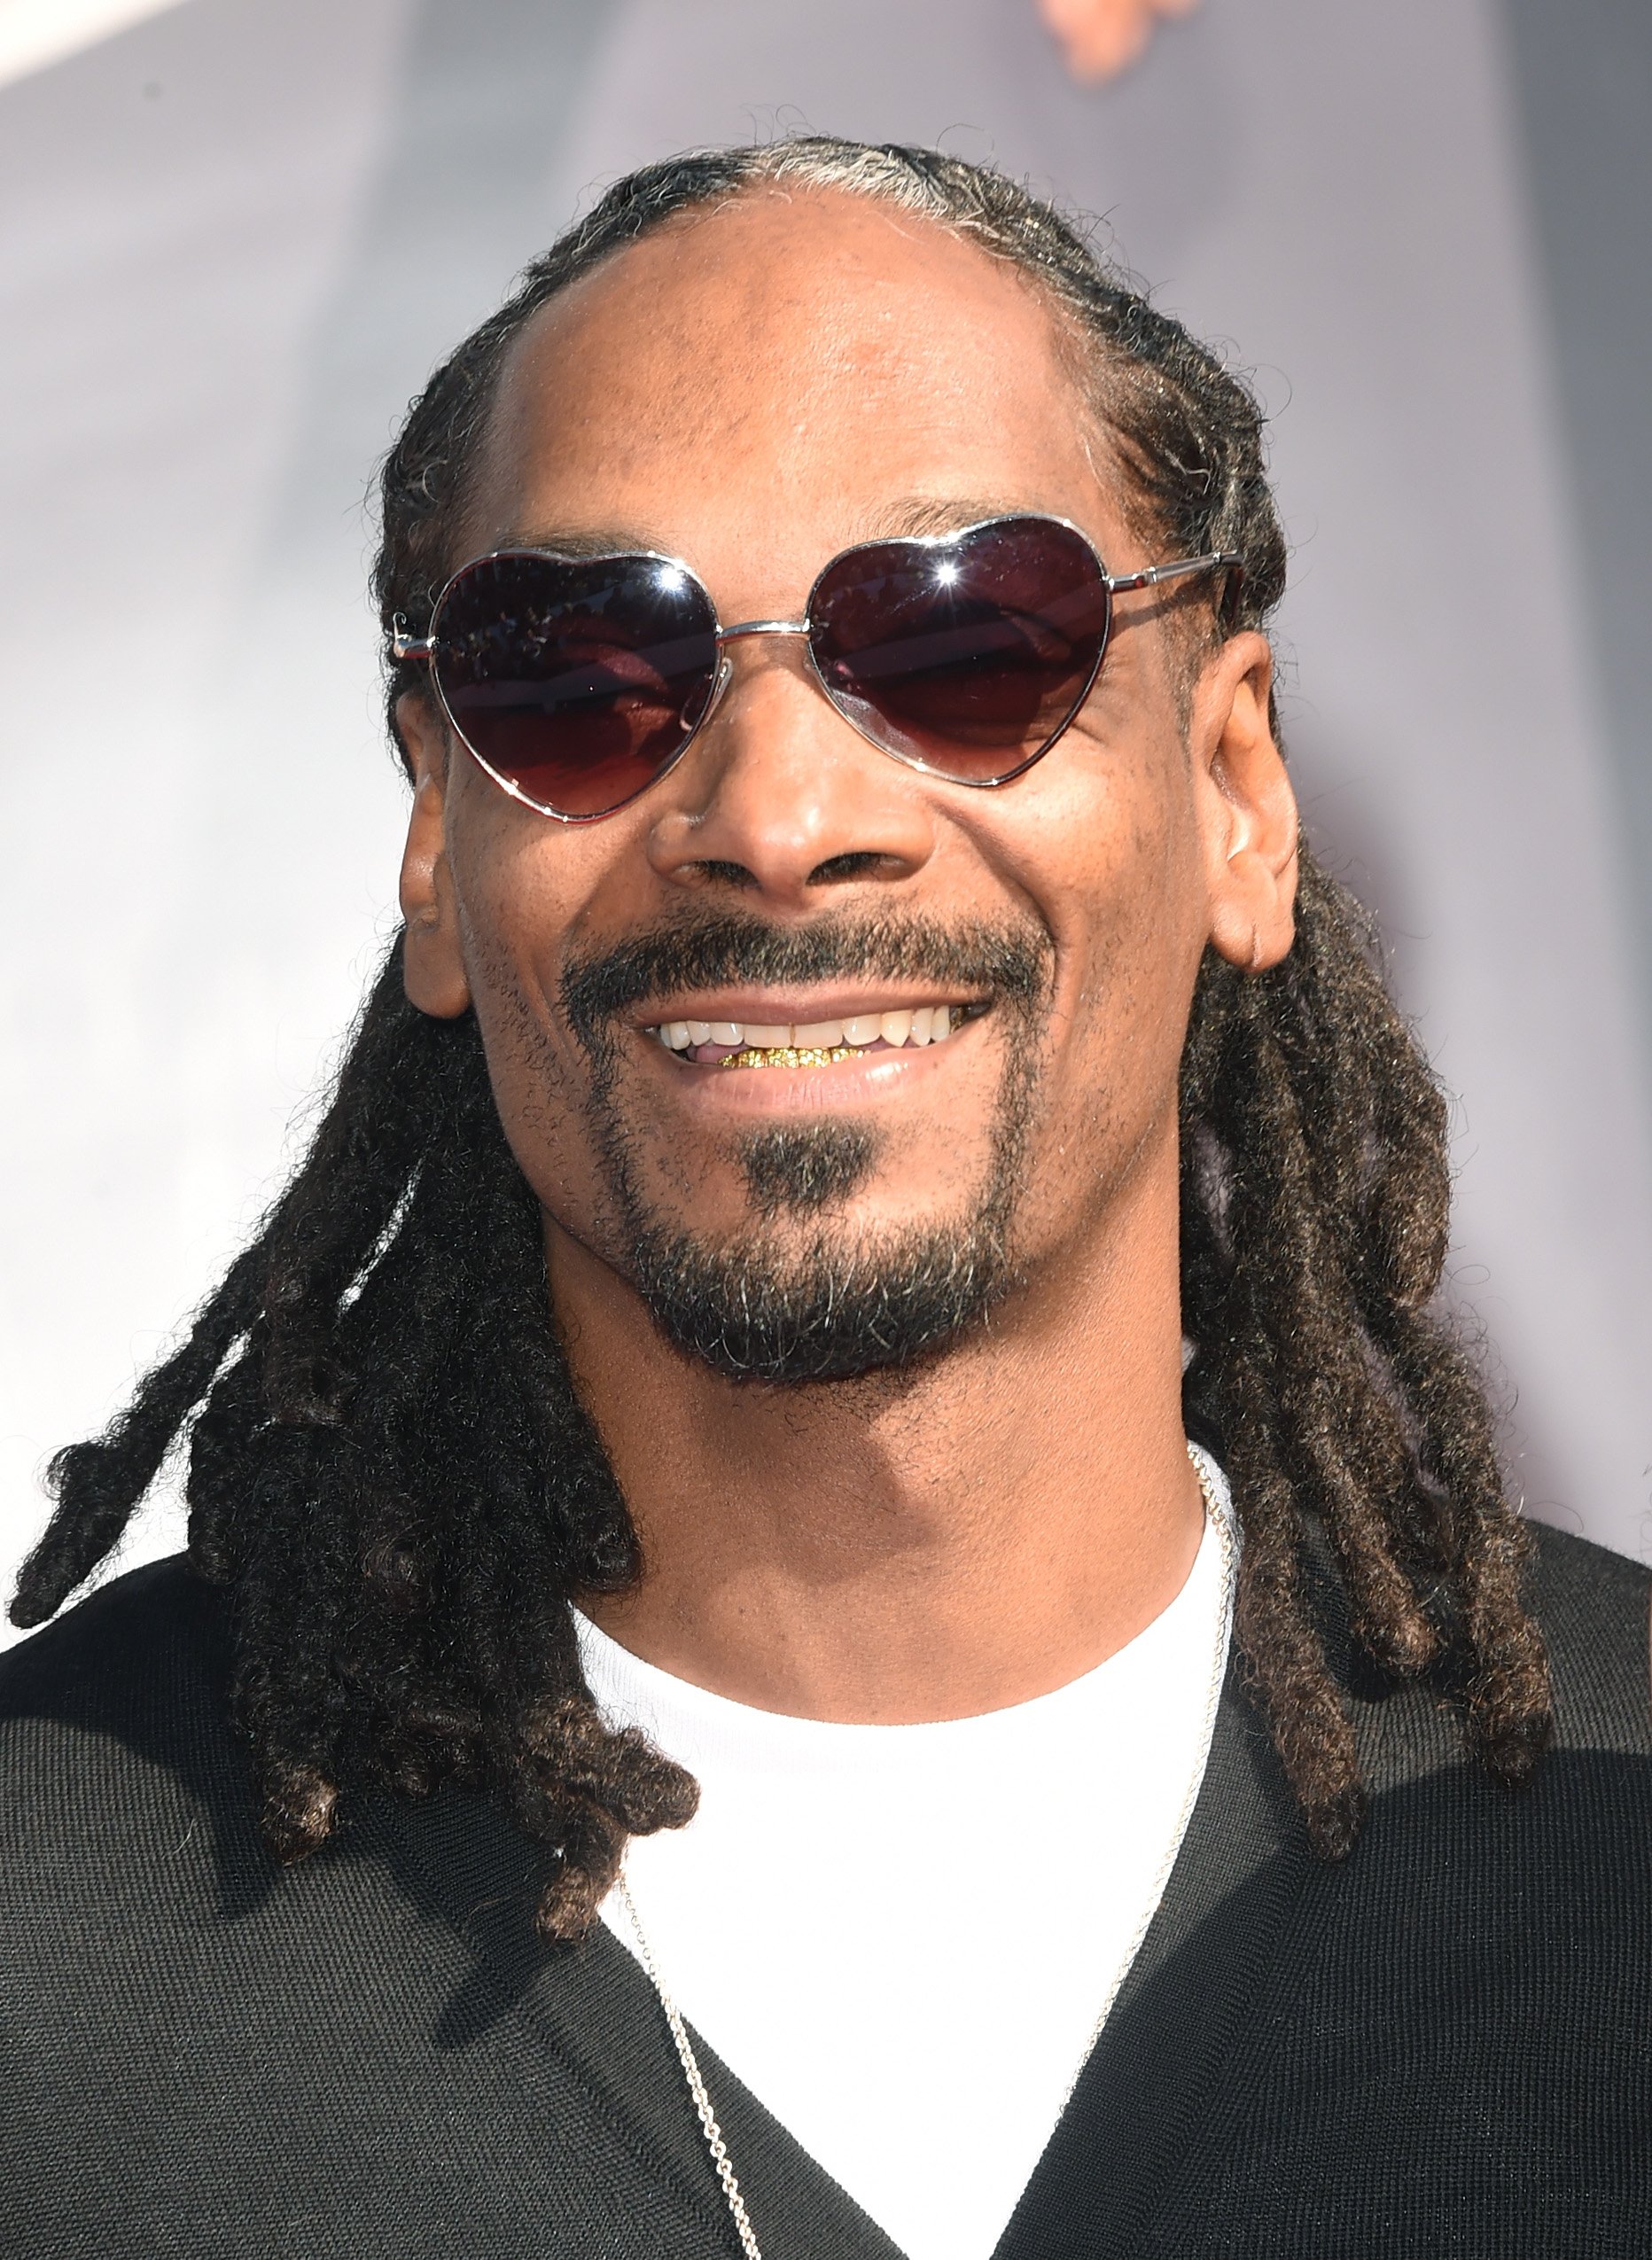 Snoop Dogg attends the 2014 MTV Video Music Awards at The Forum on August 24, 2014. | Source: Getty Images